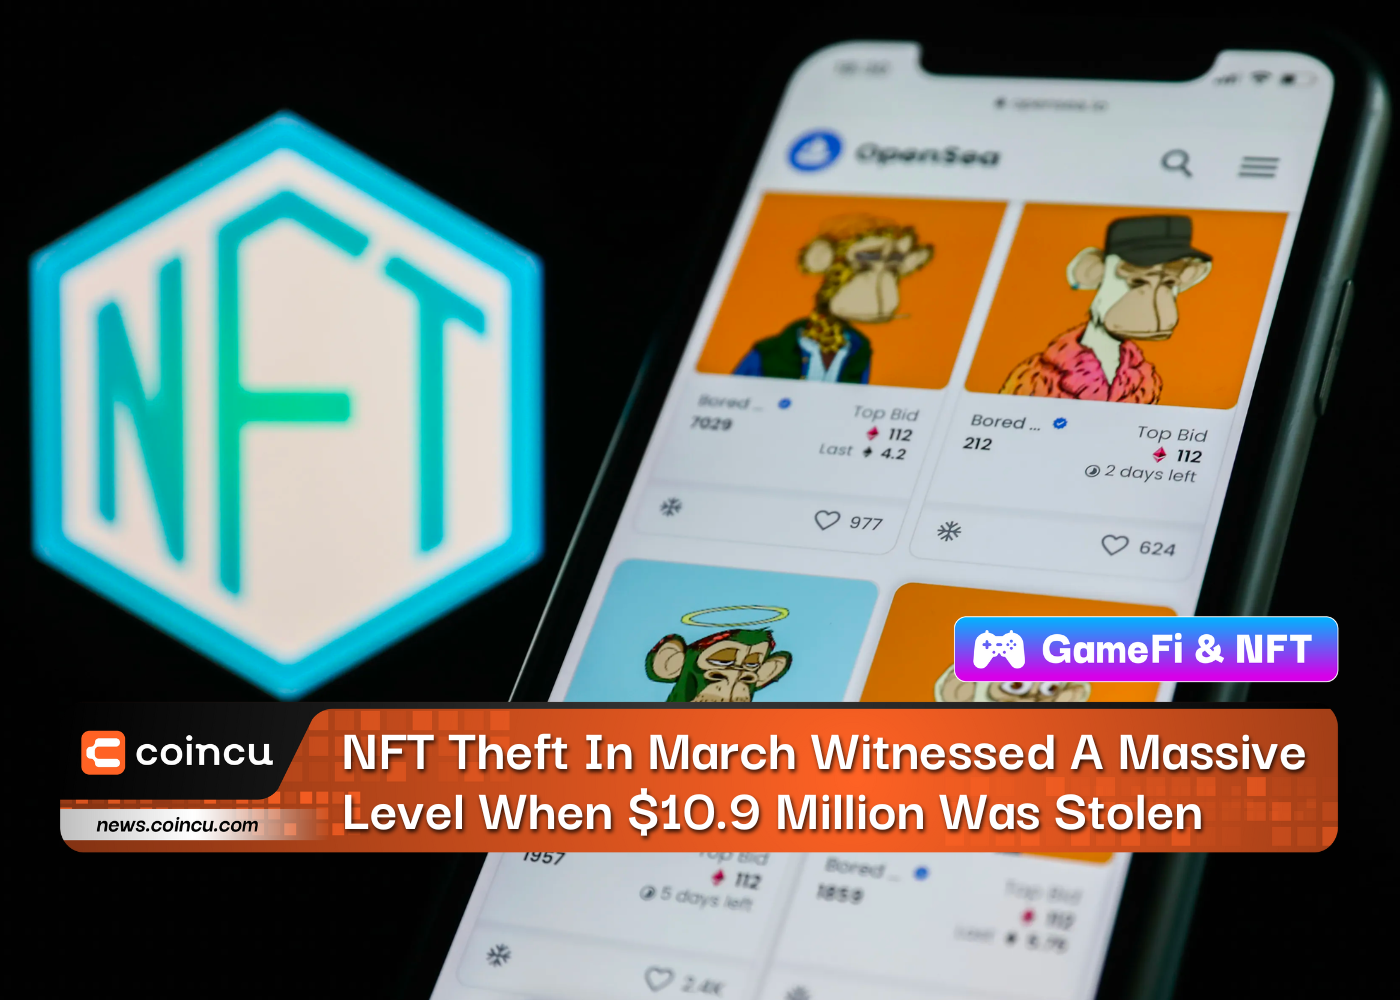 NFT Theft In March Witnessed A Massive Level When $10.9 Million Was Stolen